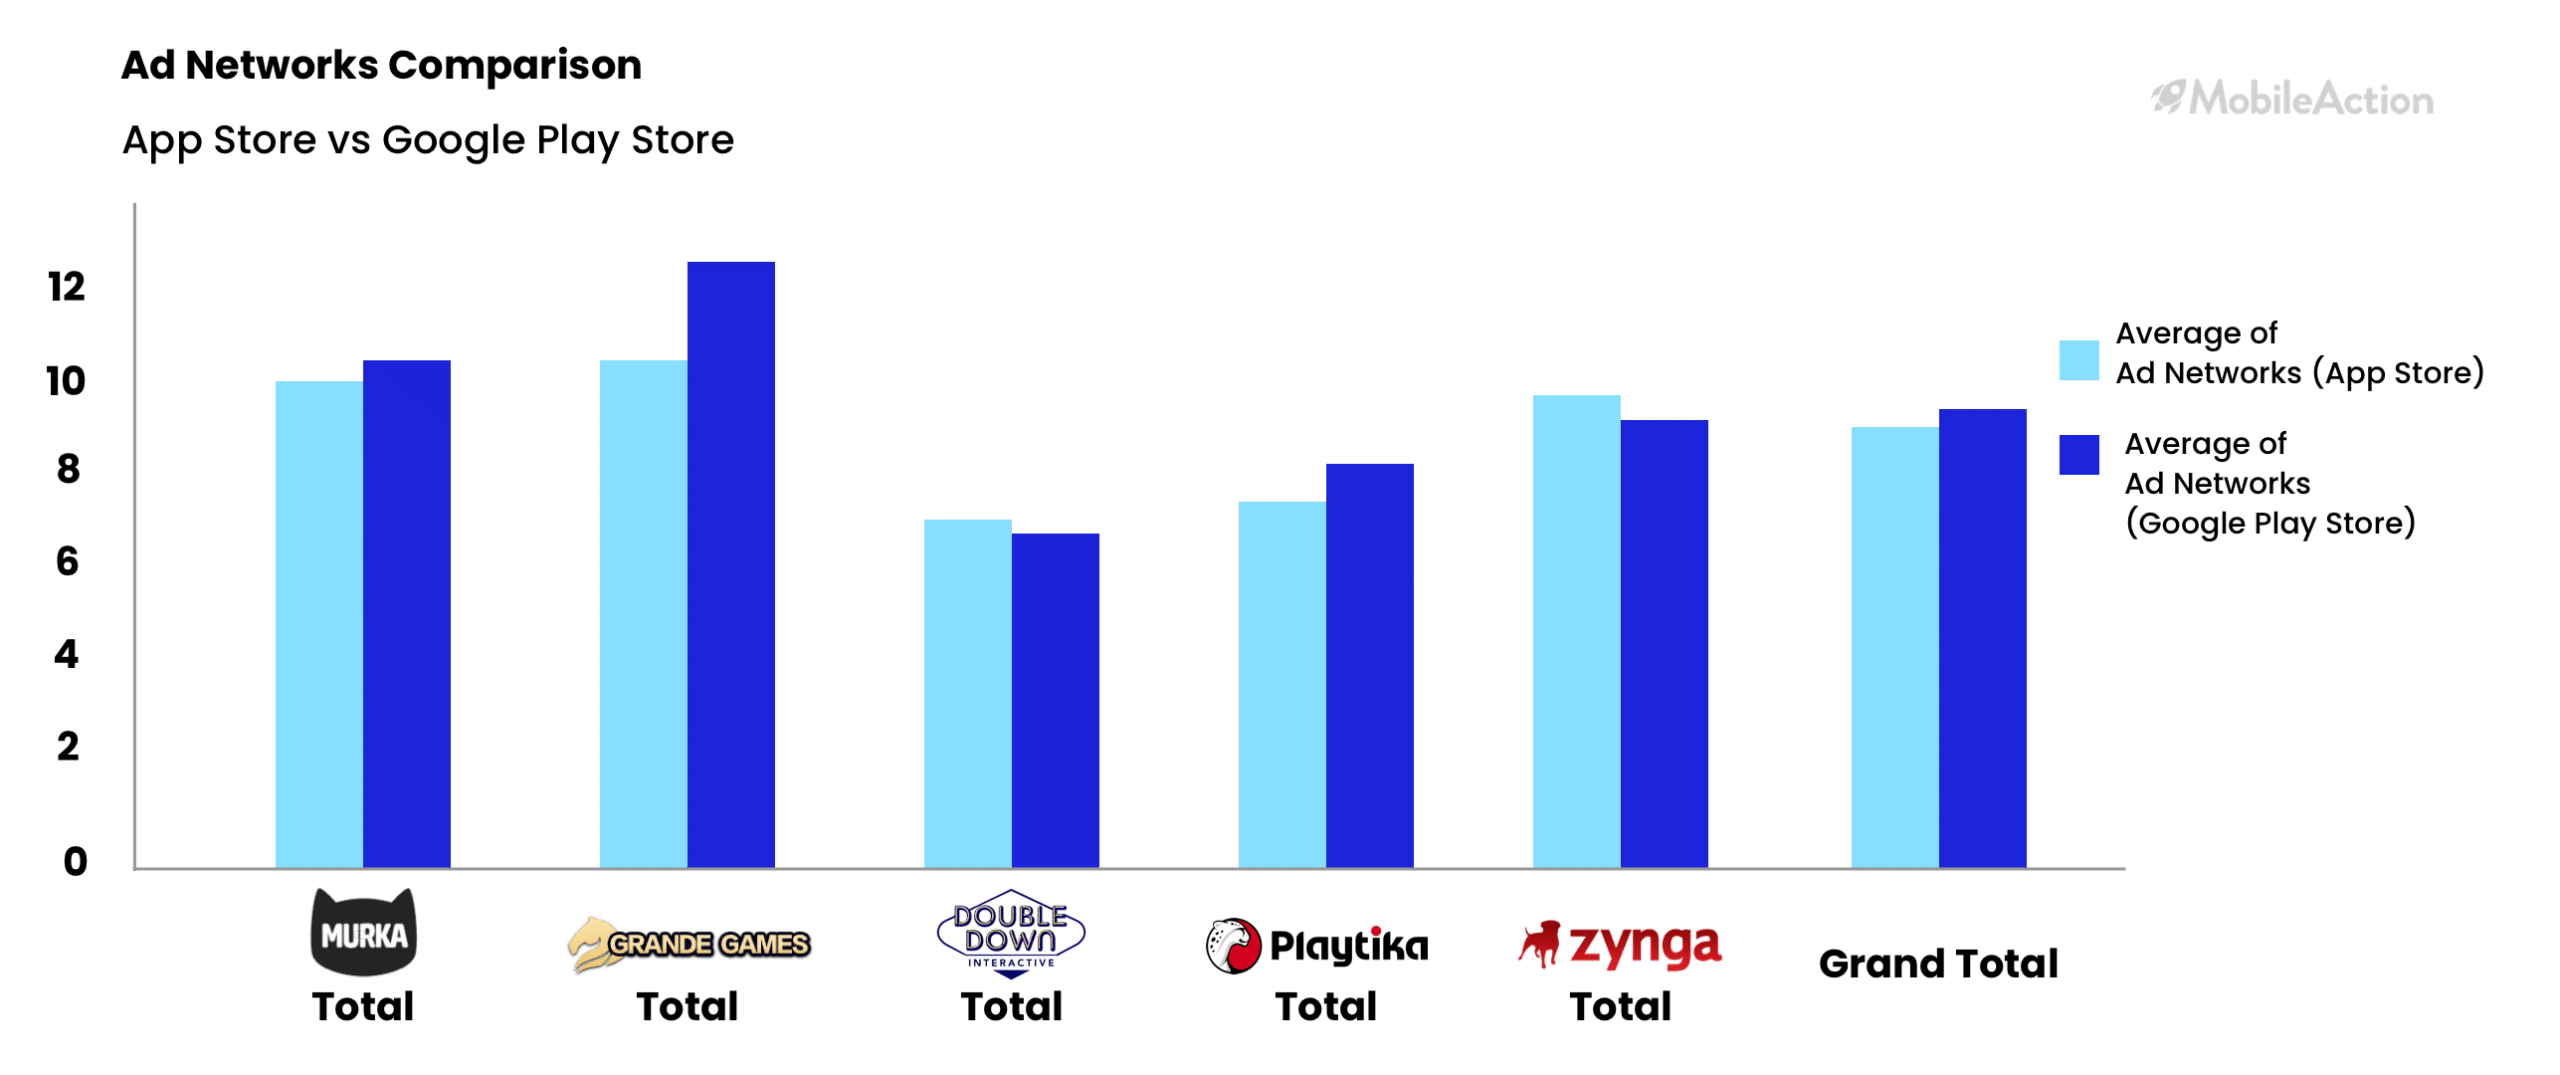 ad network comparison between stores and publishers of Casino Games